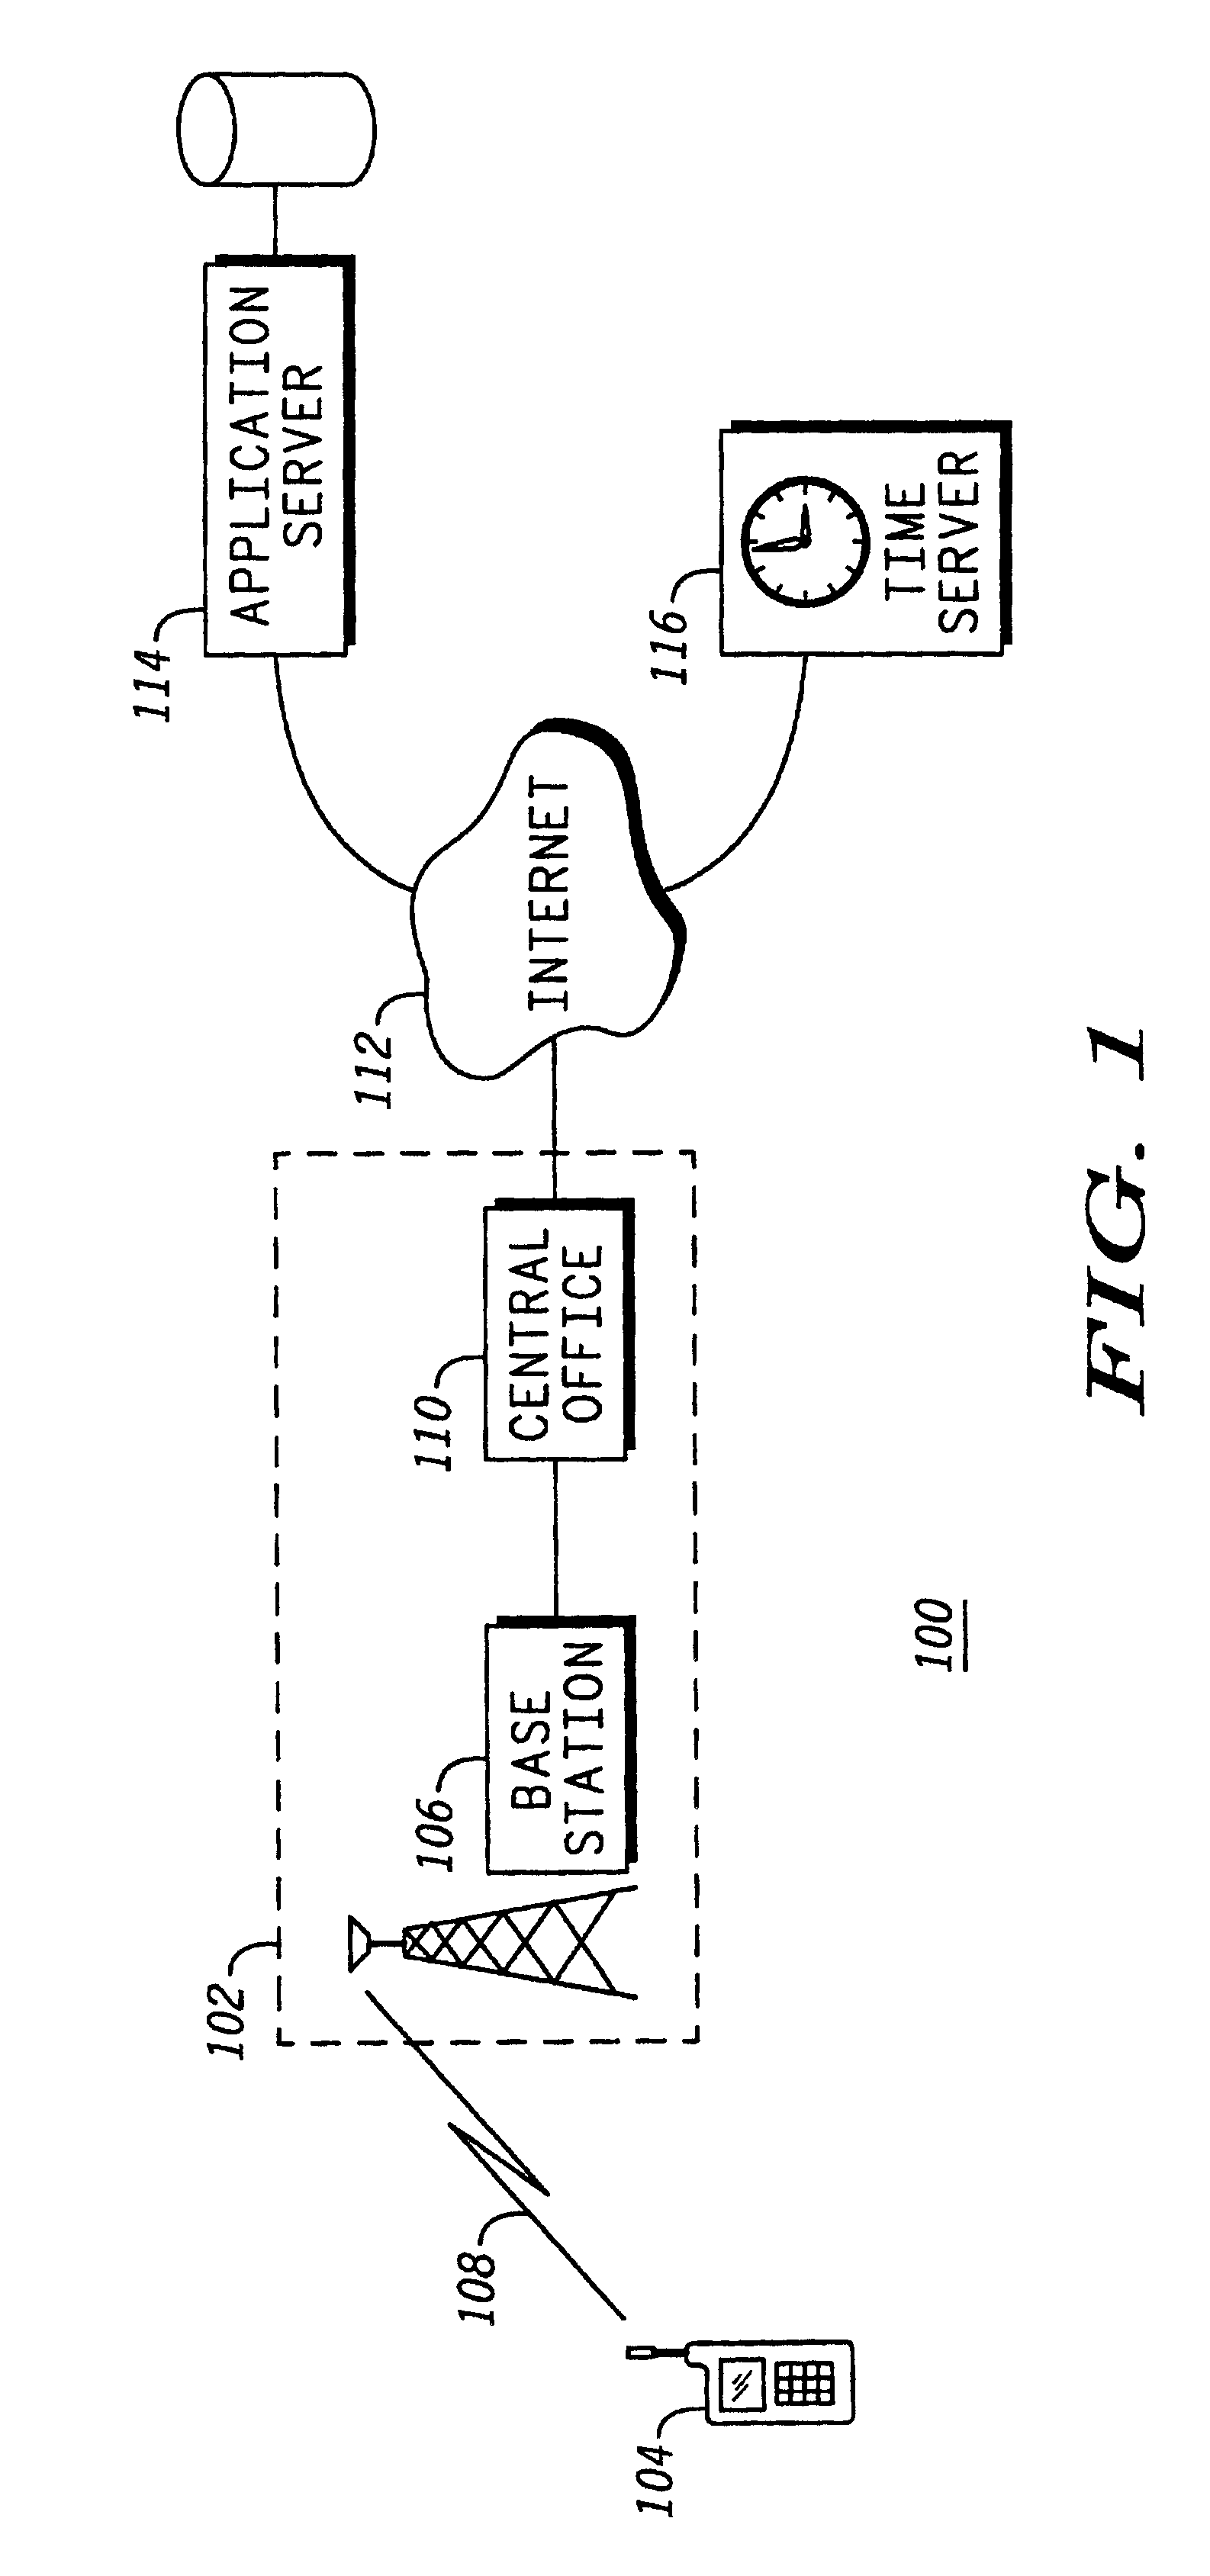 Method for enforcing a time limited software license in a mobile communication device